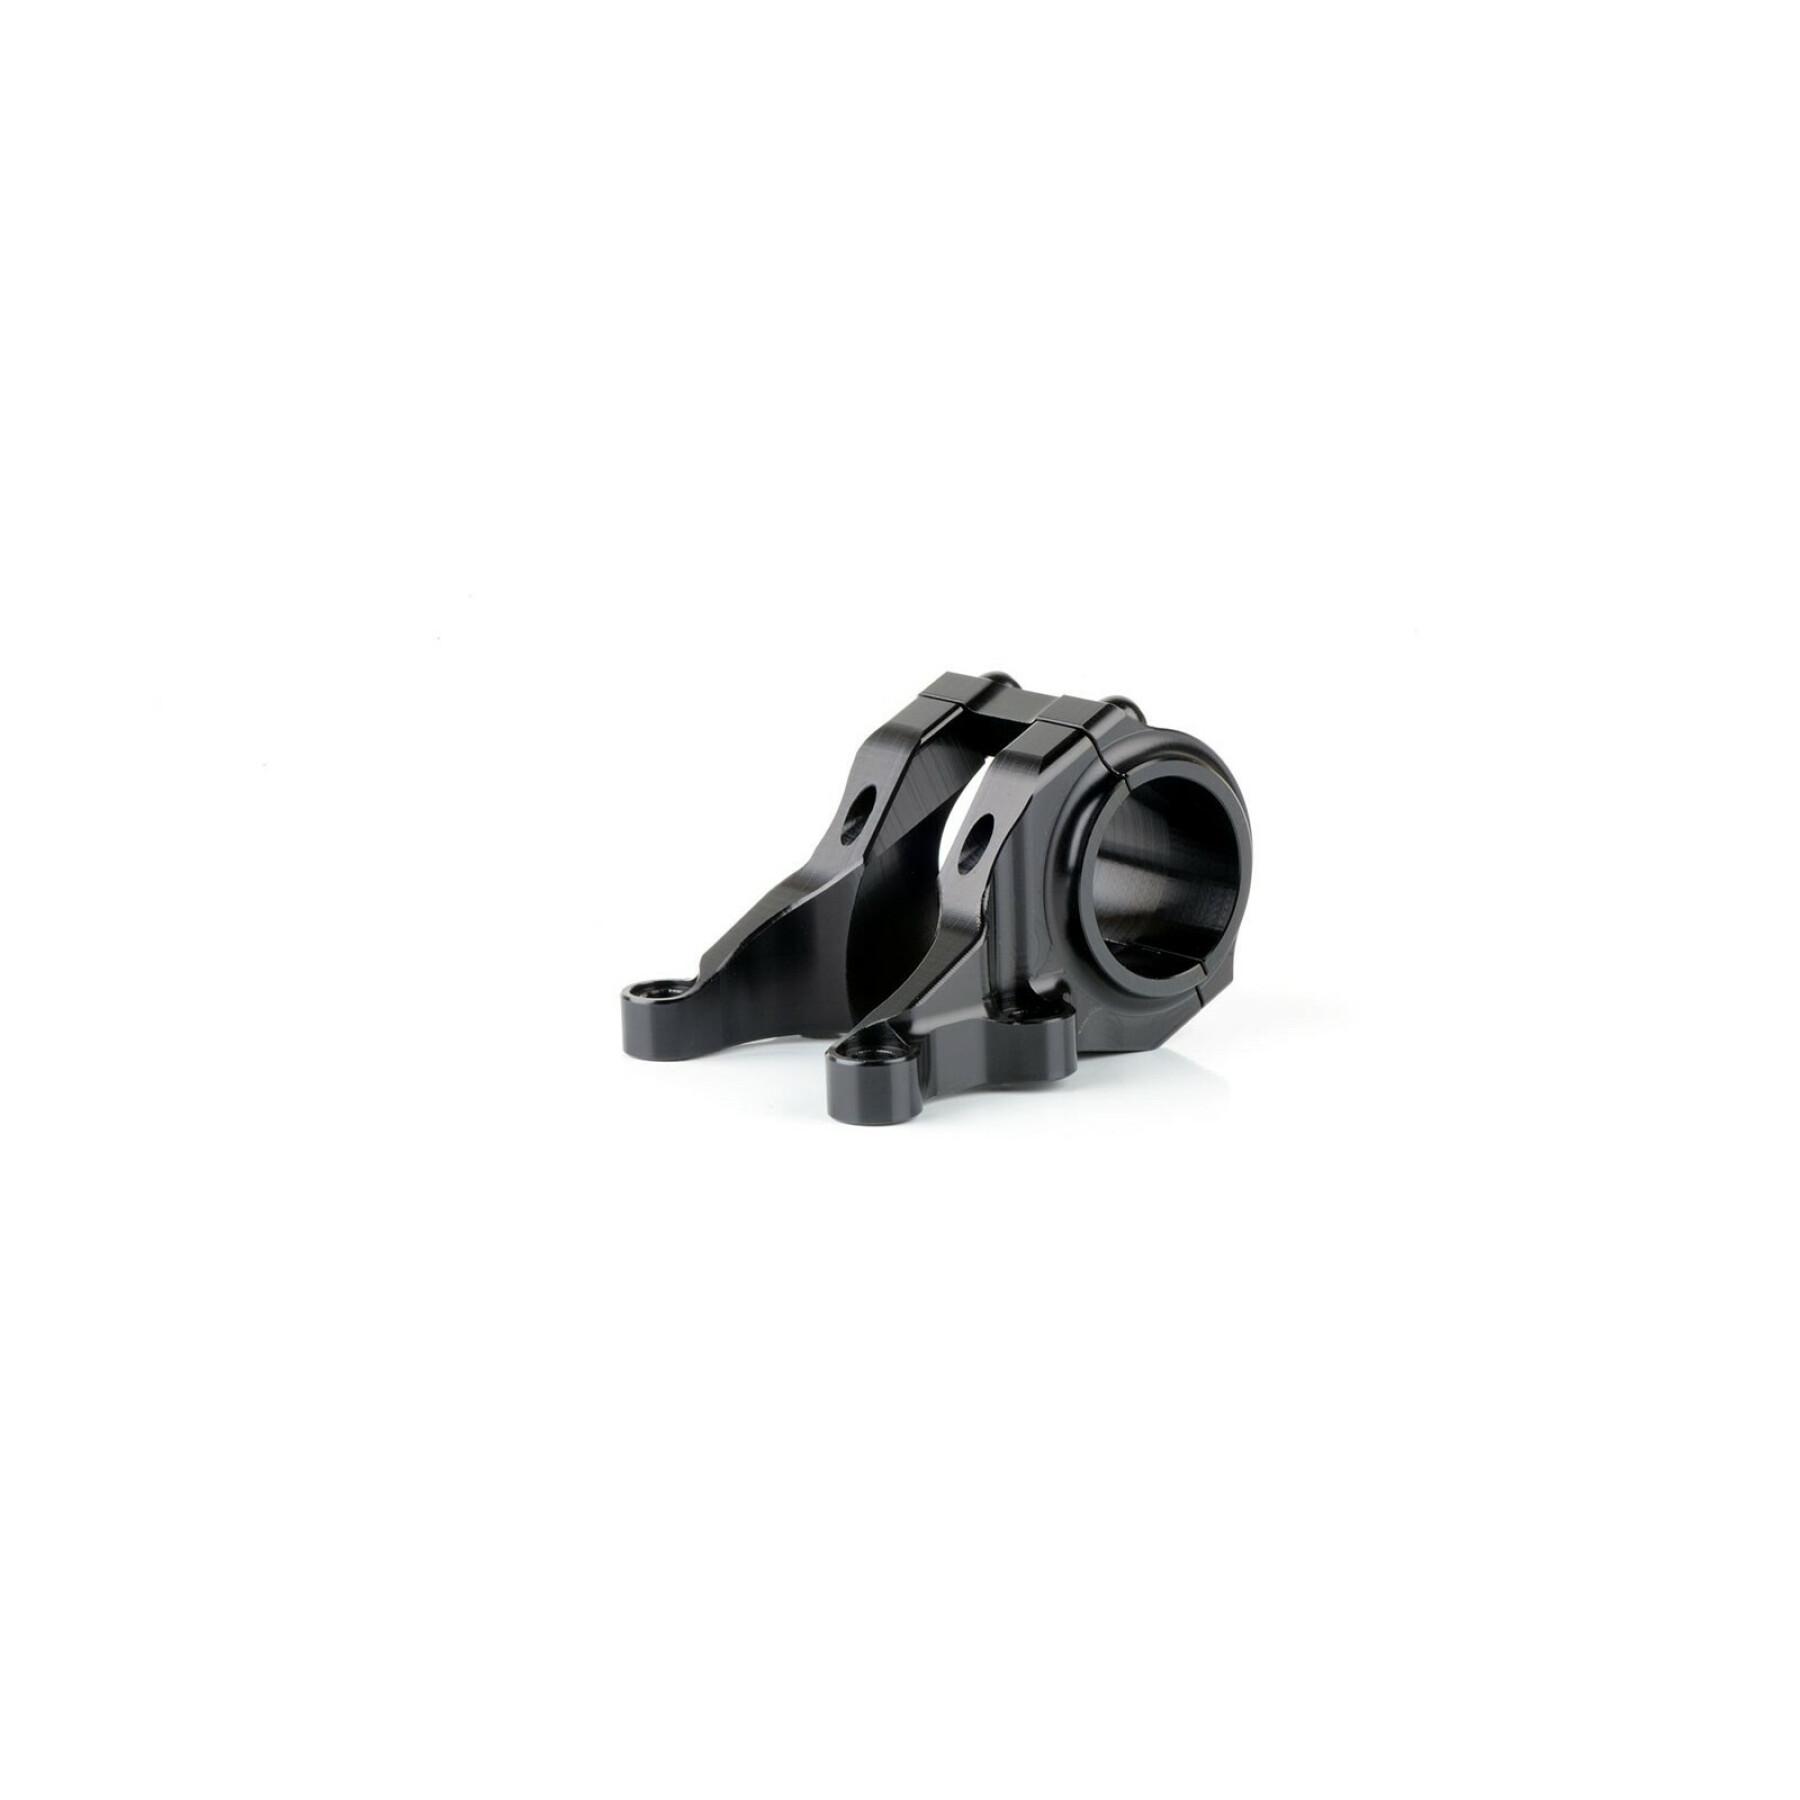 Potence Chromag Director direct mount freeride/dh 47 mm/31,8 mm